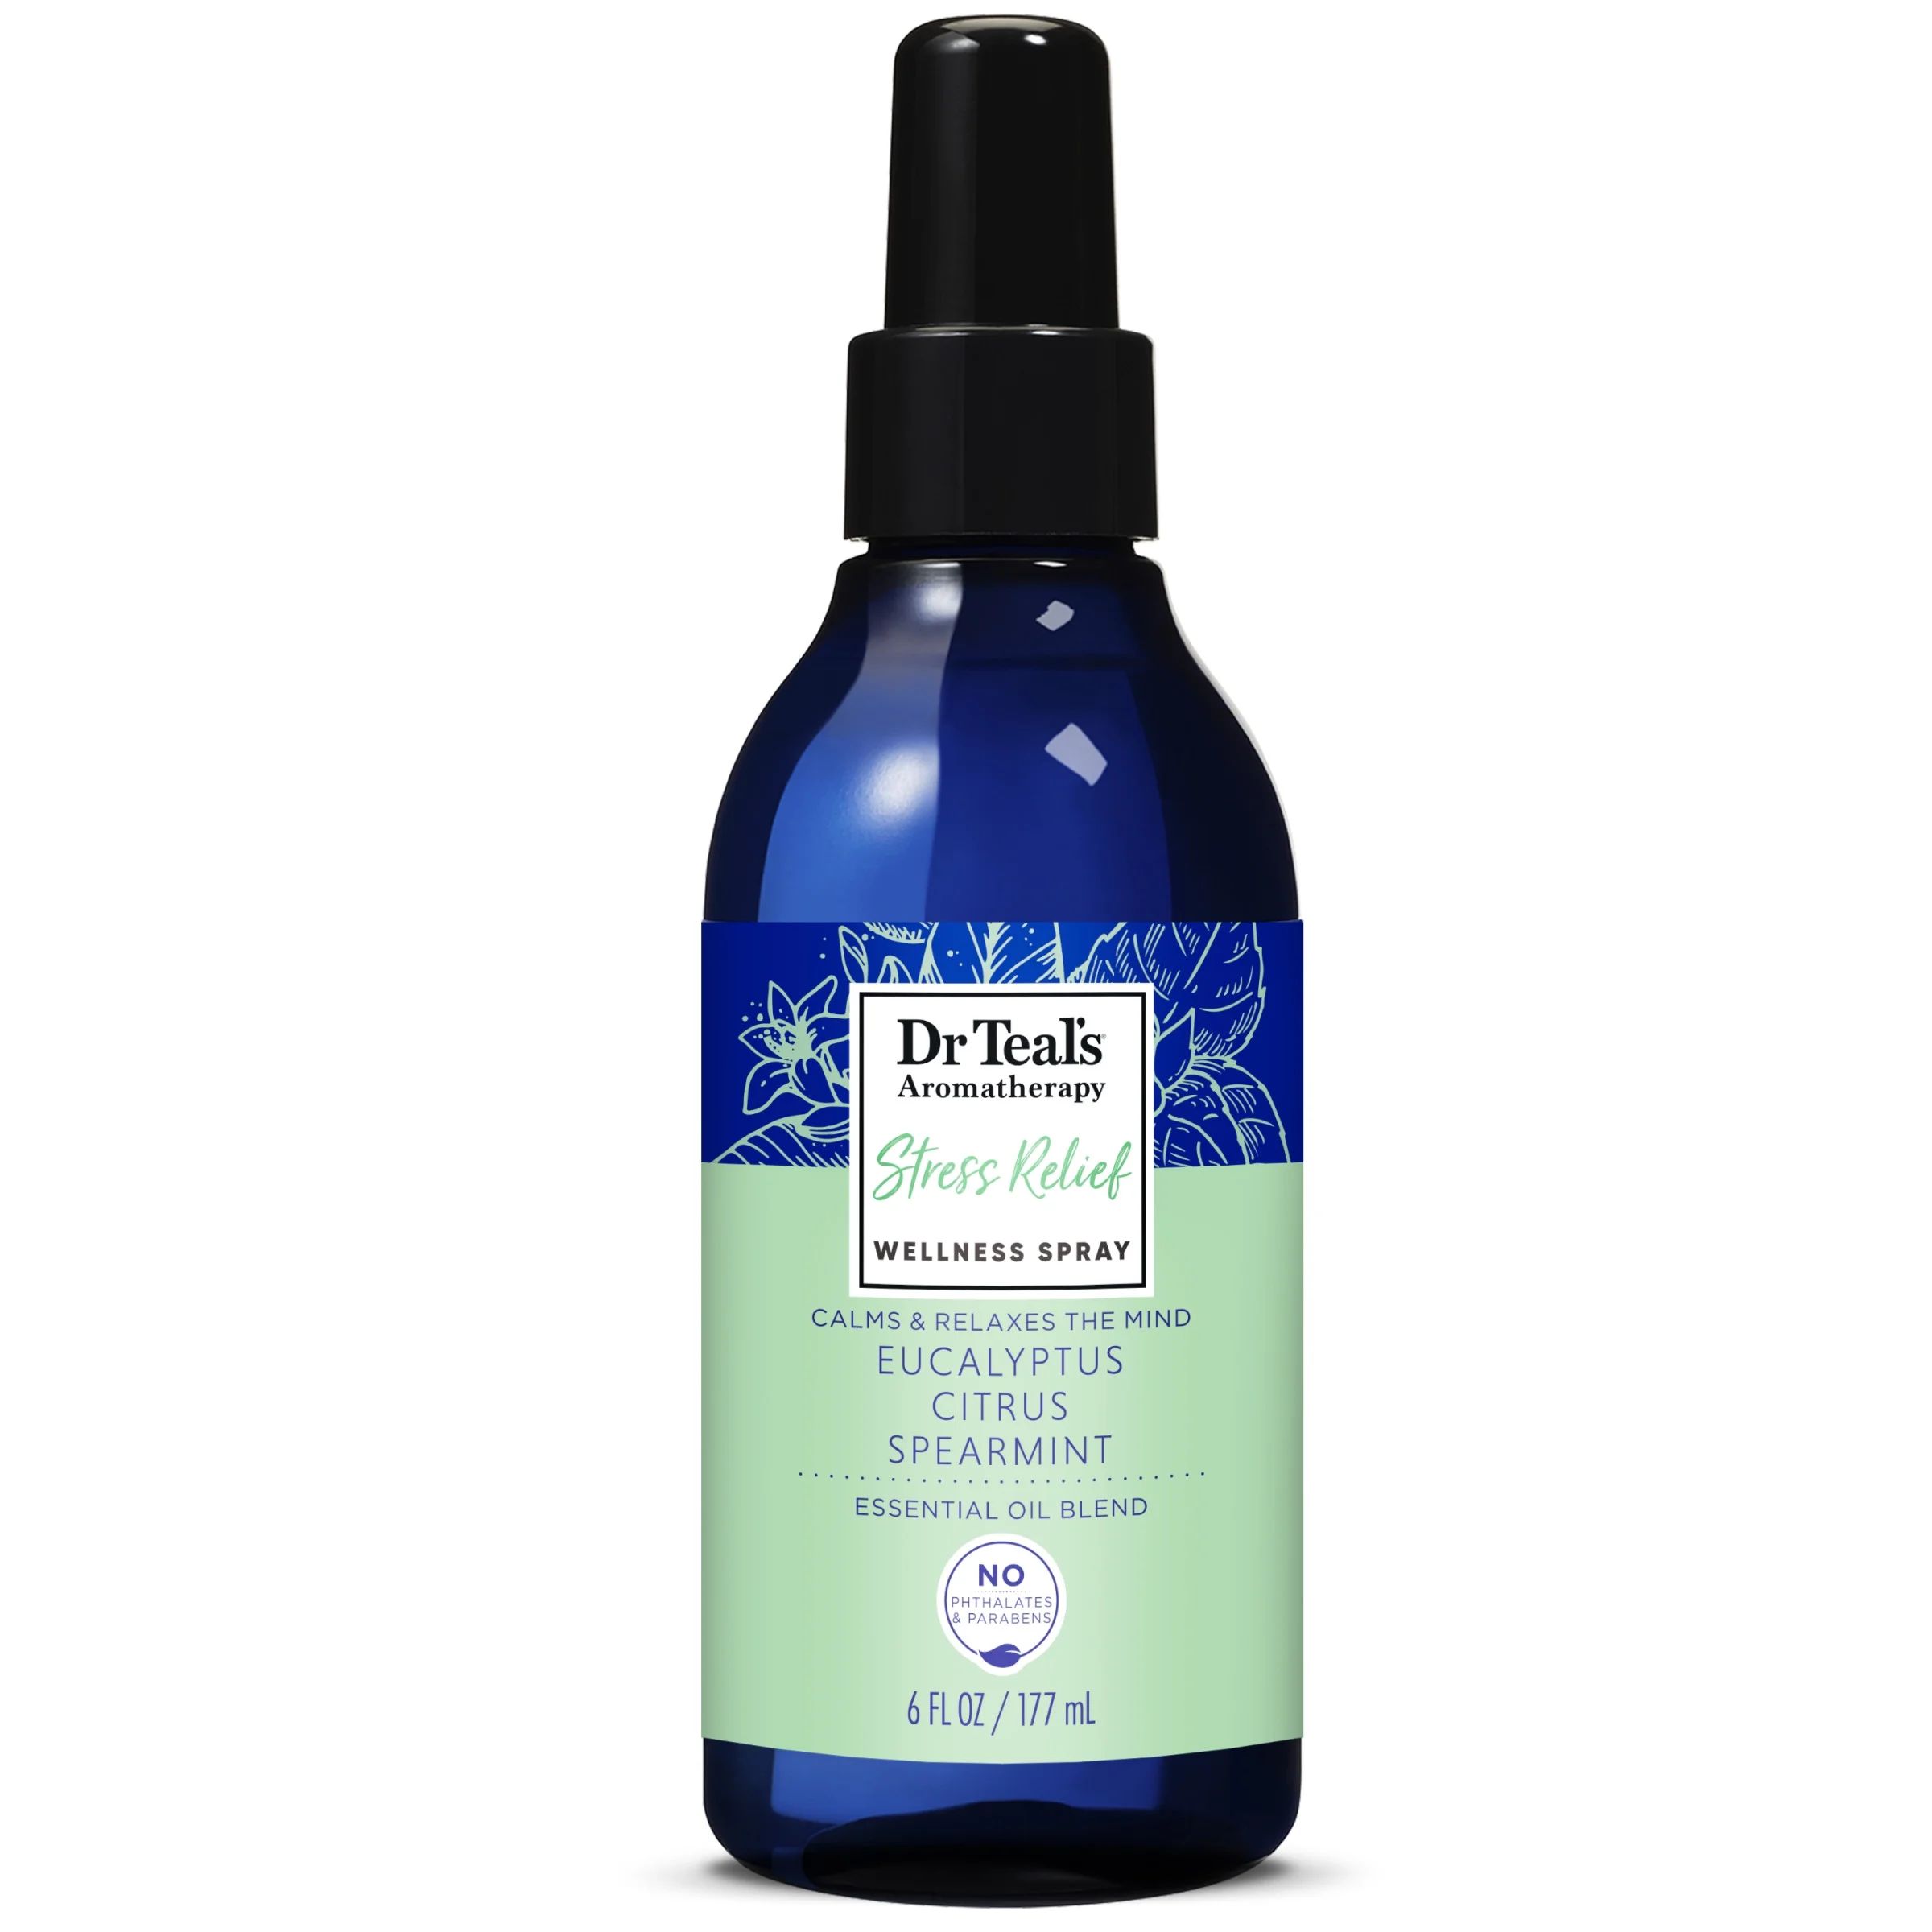 Dr Teal's Aromatherapy Stress Relief Body & Room Spray with Eucalyptus and Citrus, 6 fl oz | Walmart (US)